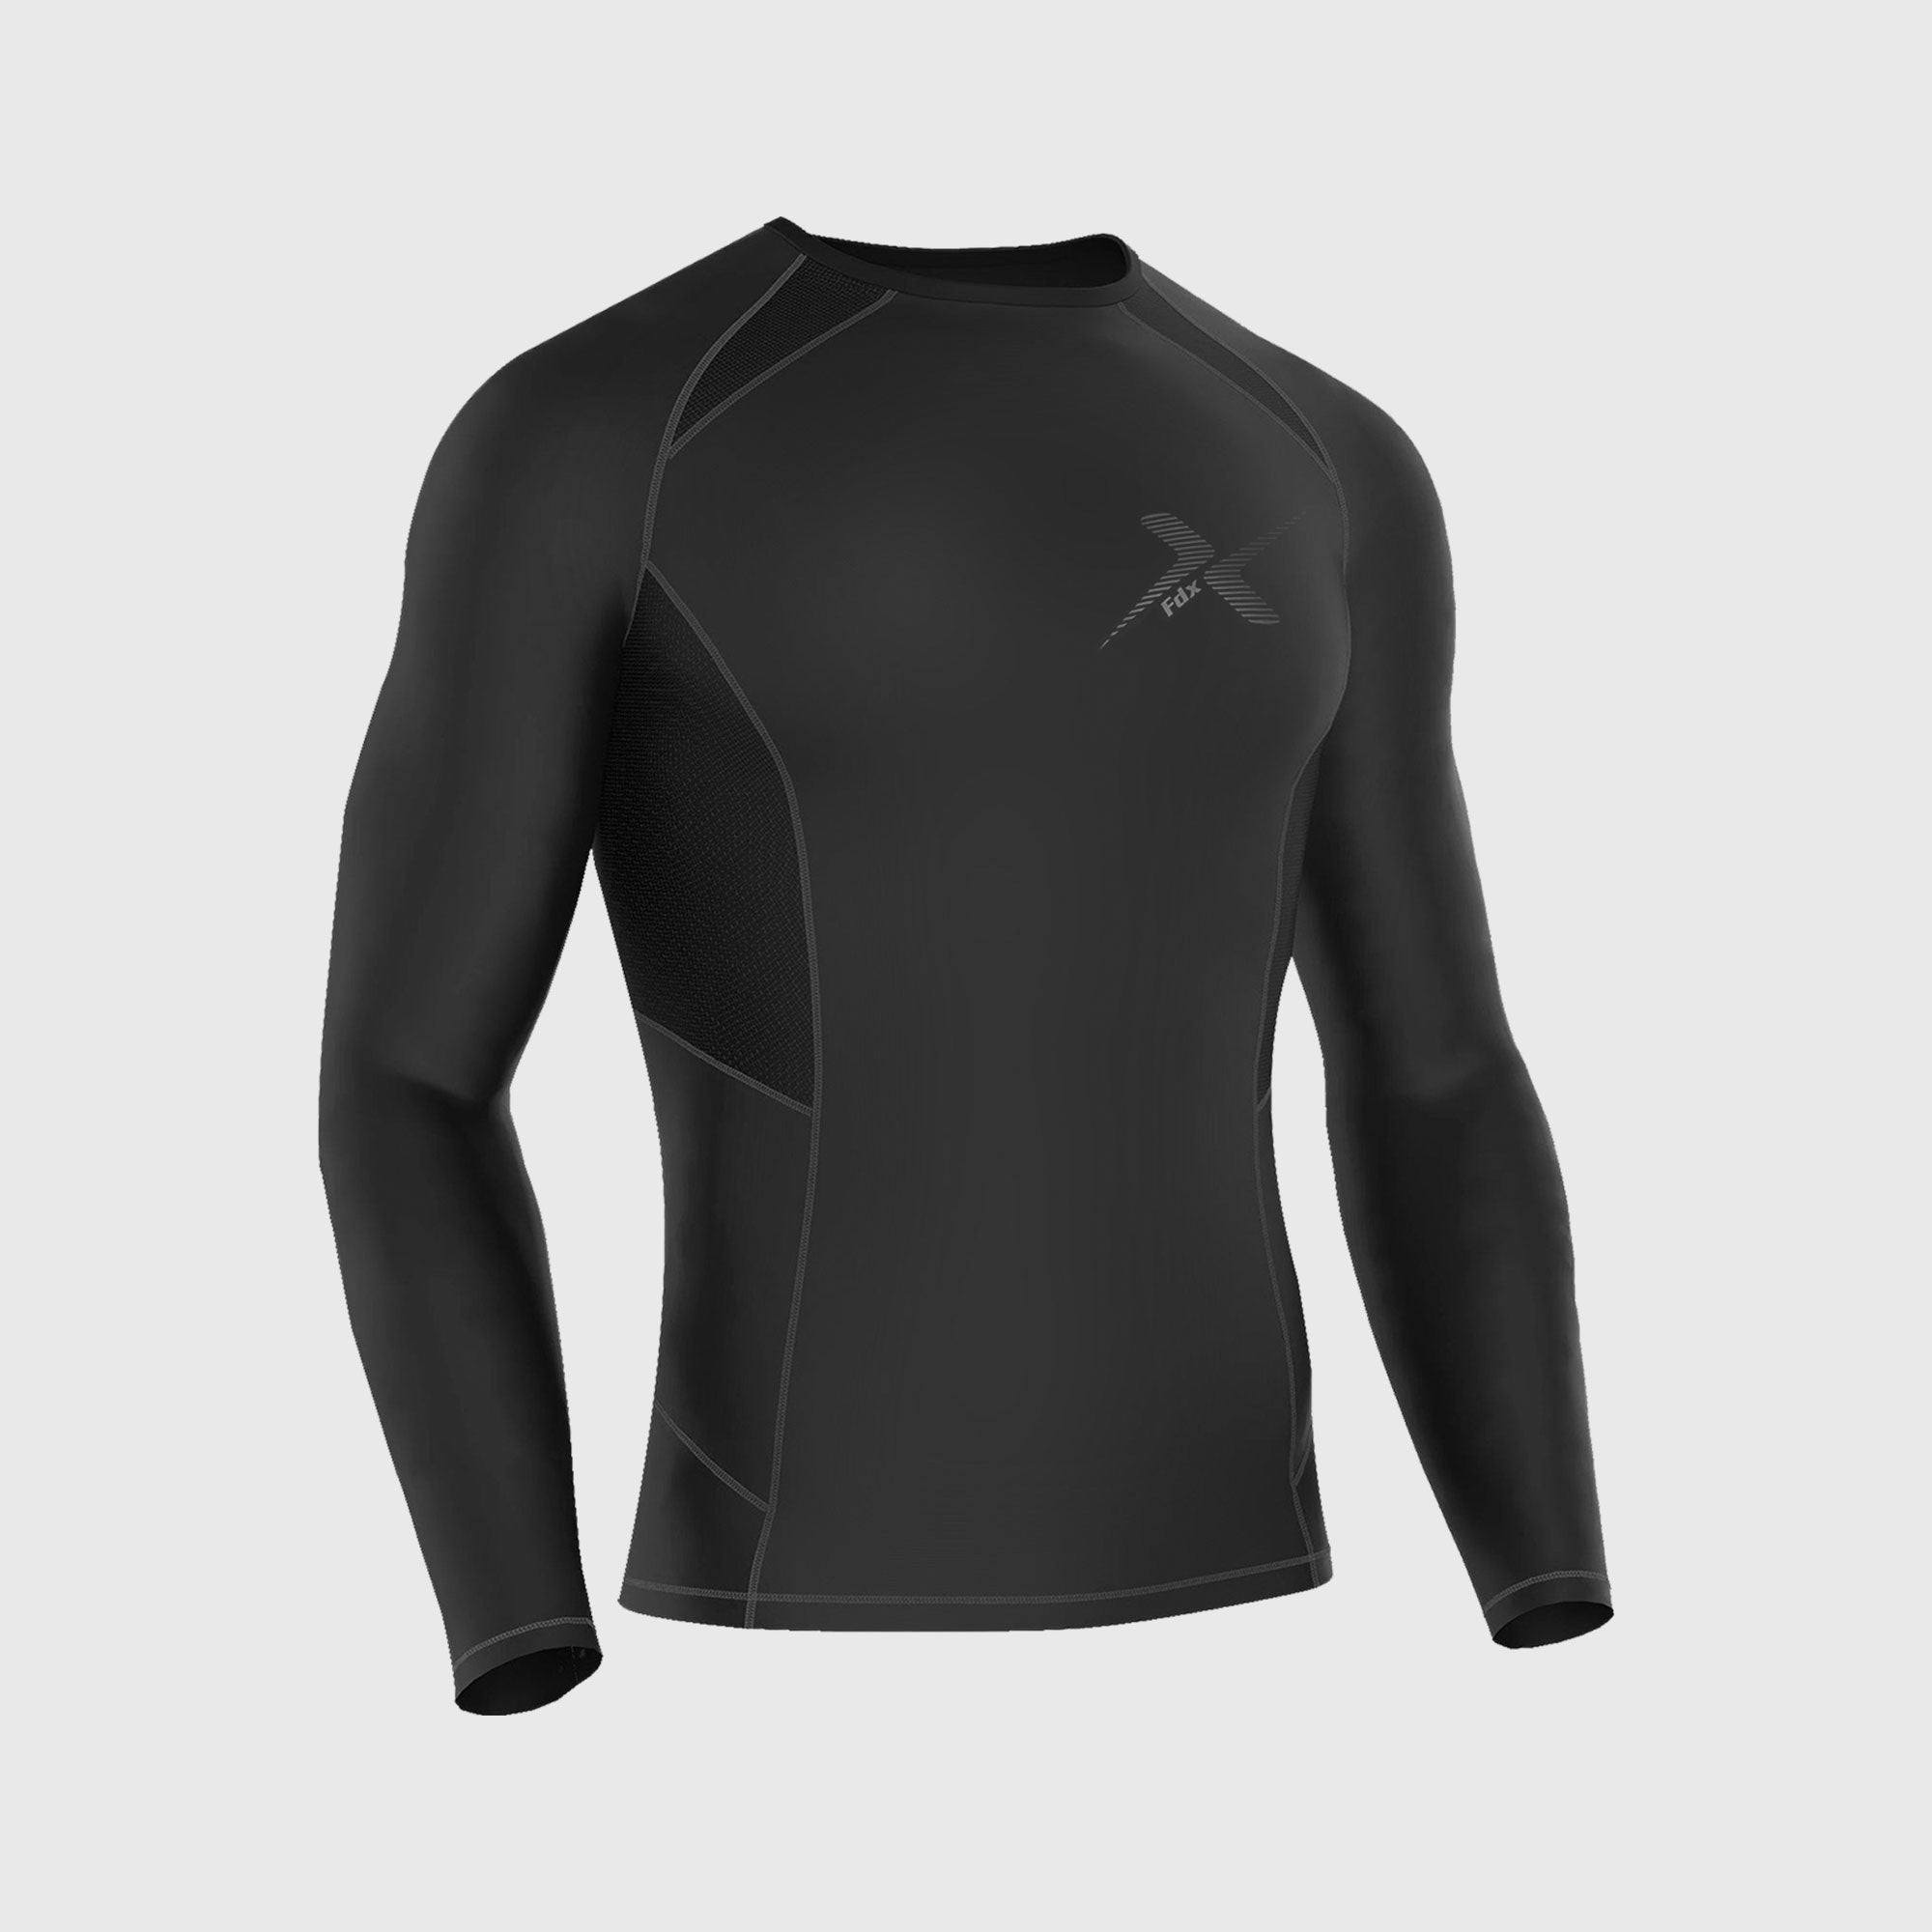 Fdx Recoil Grey Men's Base Layer Thermal Winter Compression Top